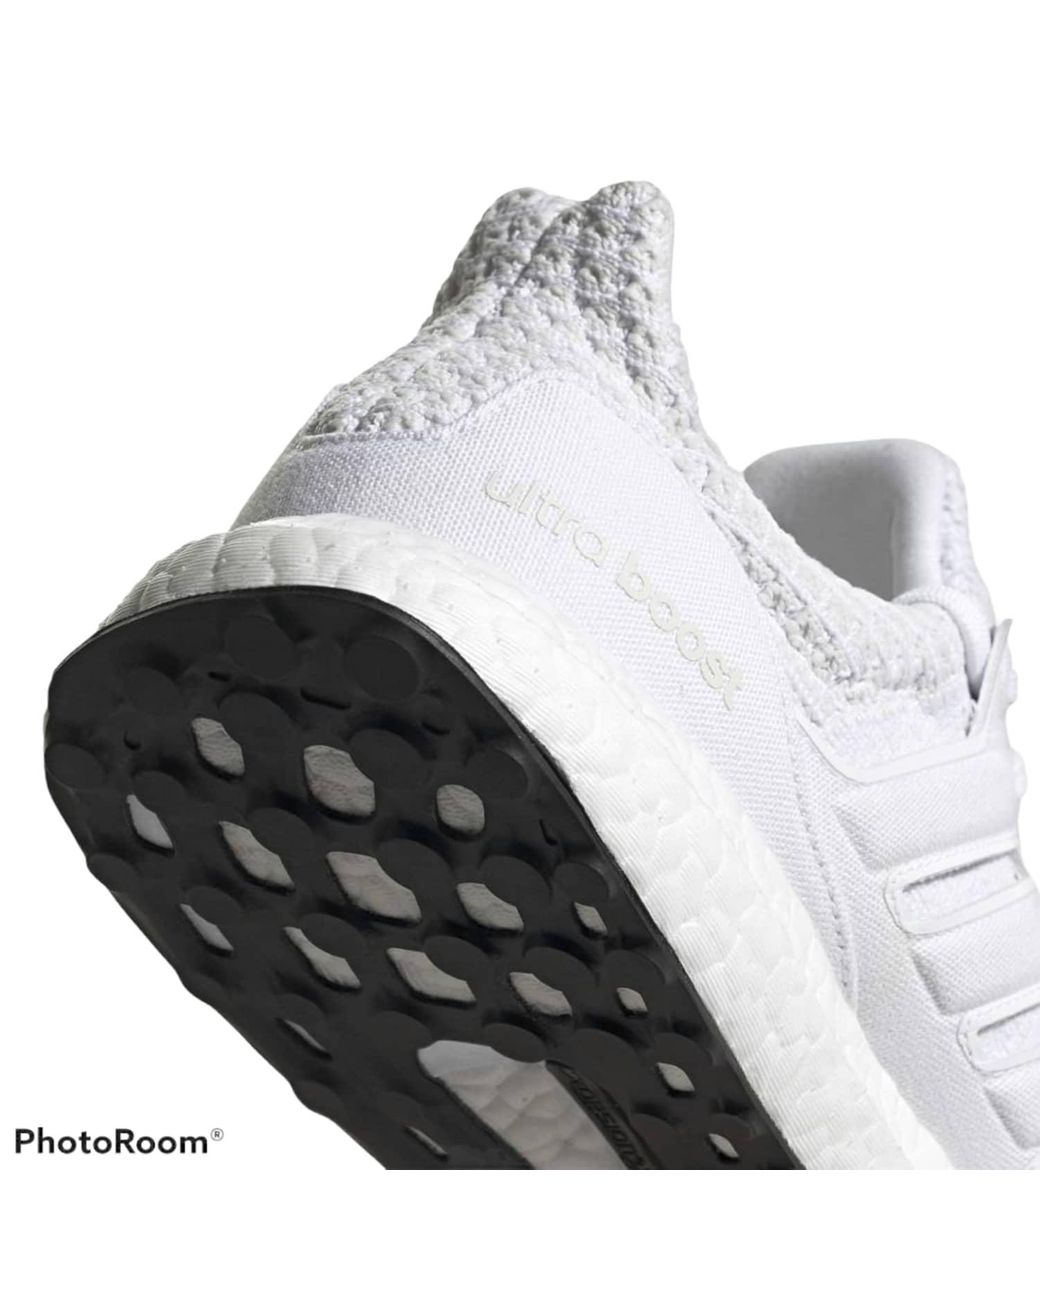 adidas Ultraboost 5.0 Dna Shoes Triple White | Lyst